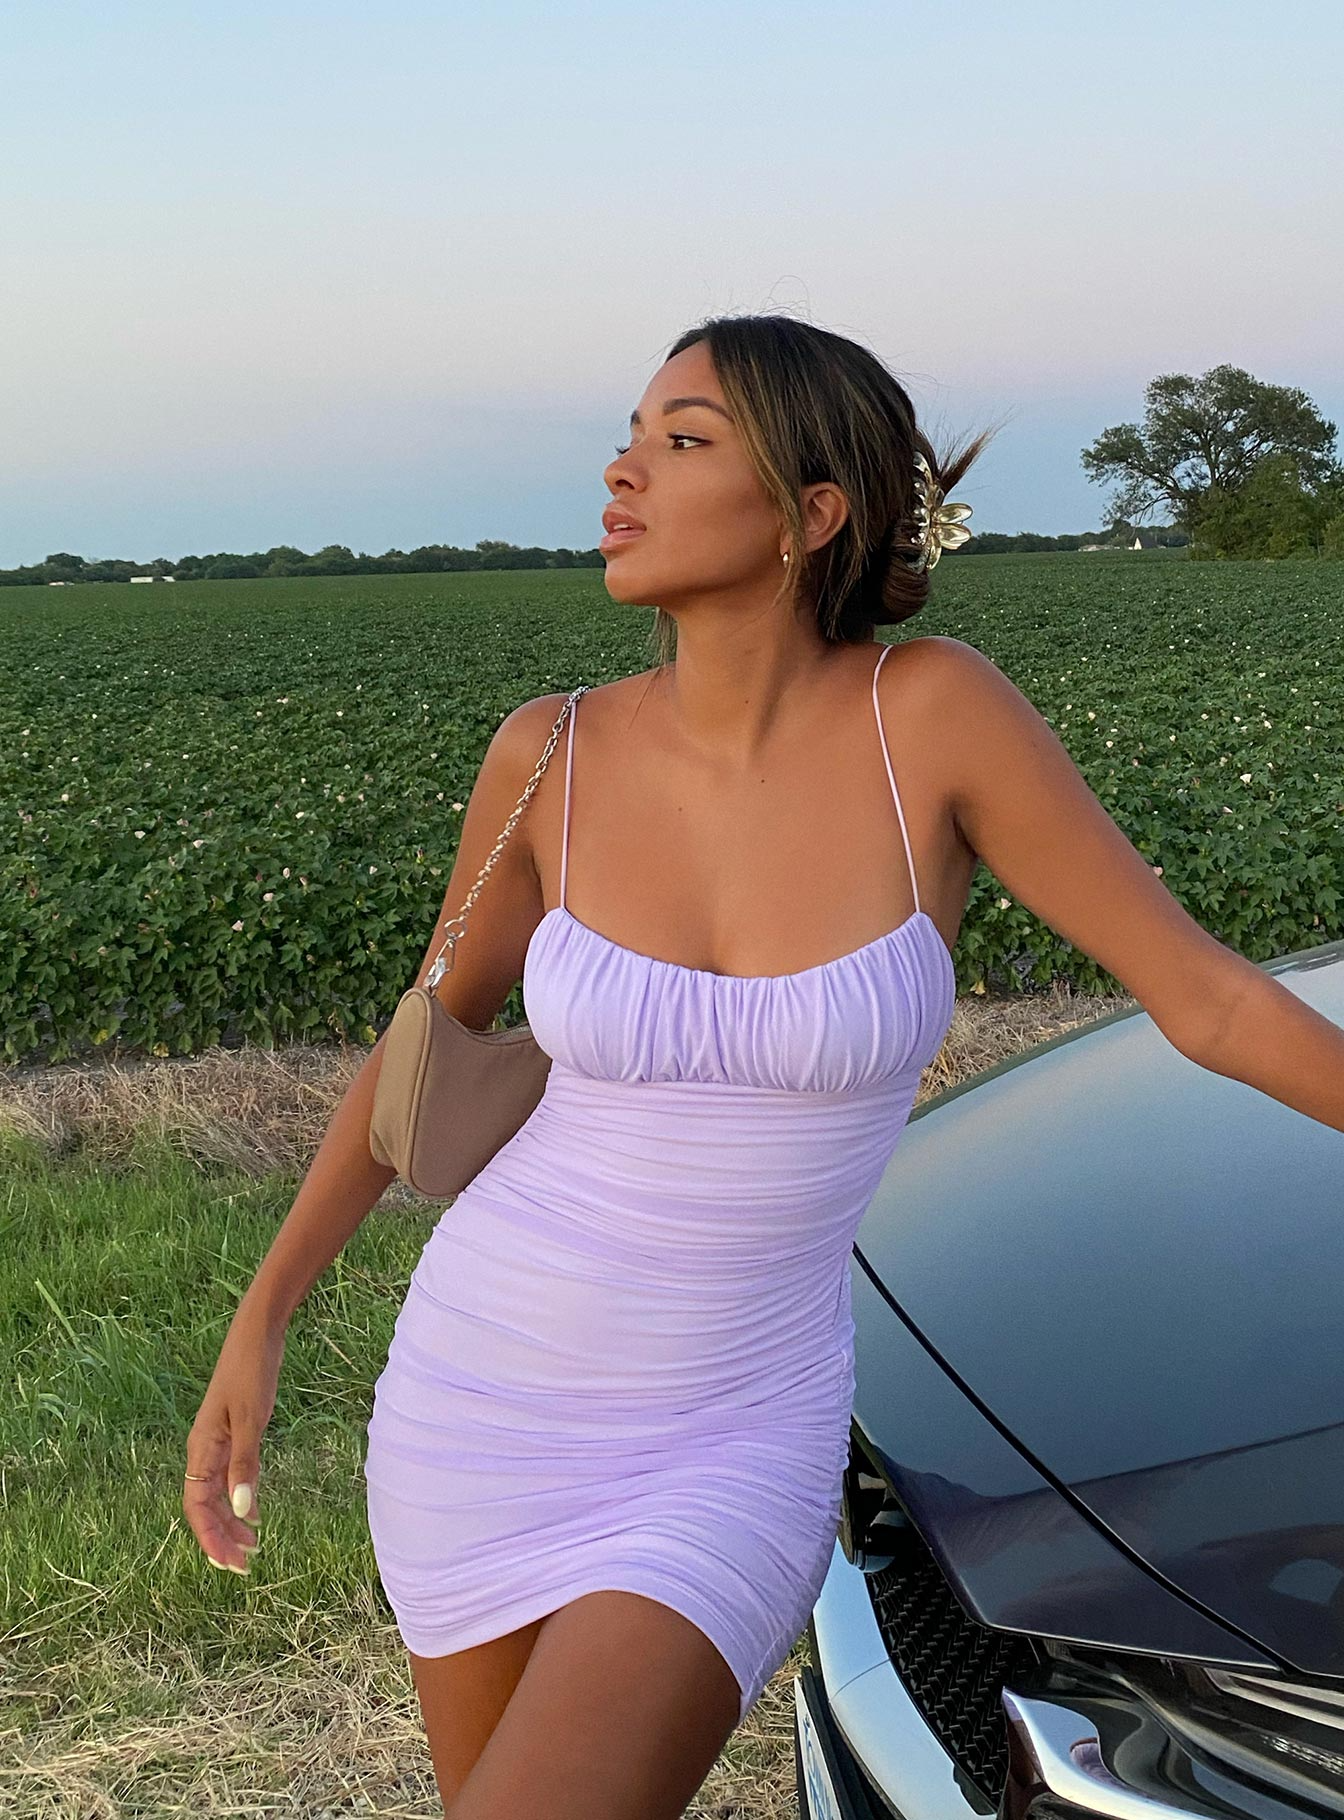 The Guide To All The Summer Dresses Going Viral On TikTok